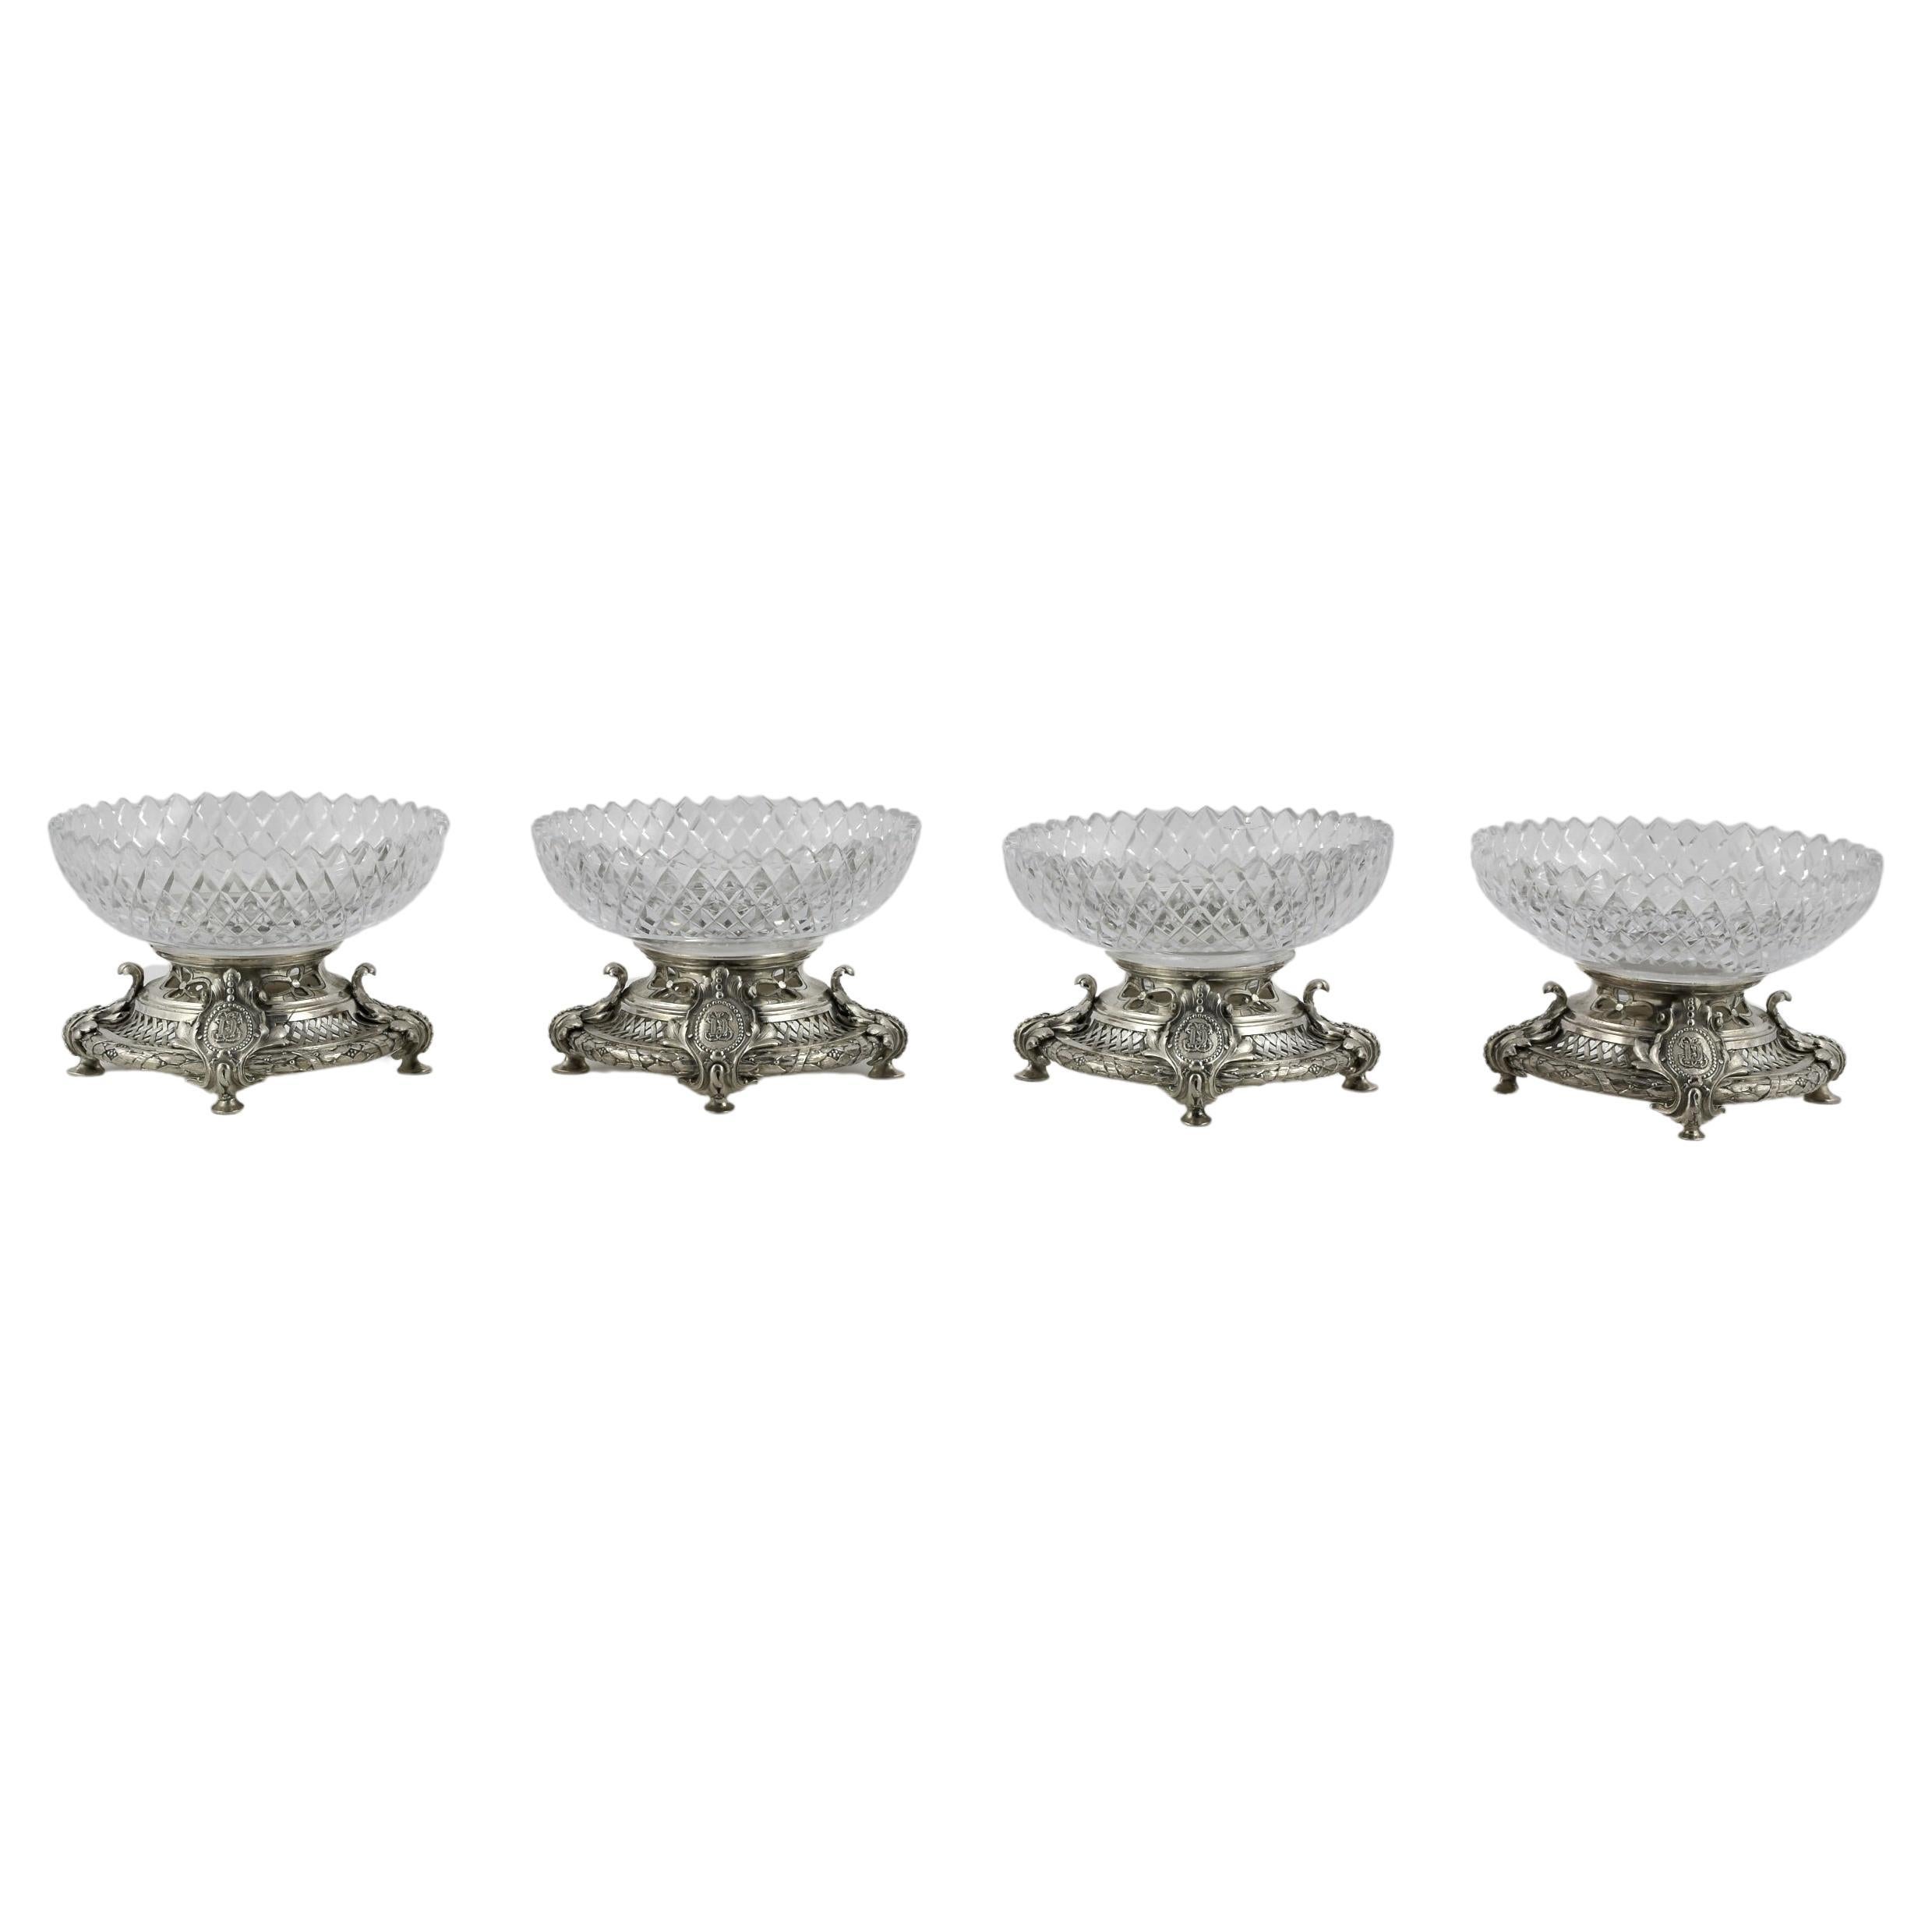 Suite of Four Silver-Plated Bronze Dessert Stand Comports, French, circa 1890